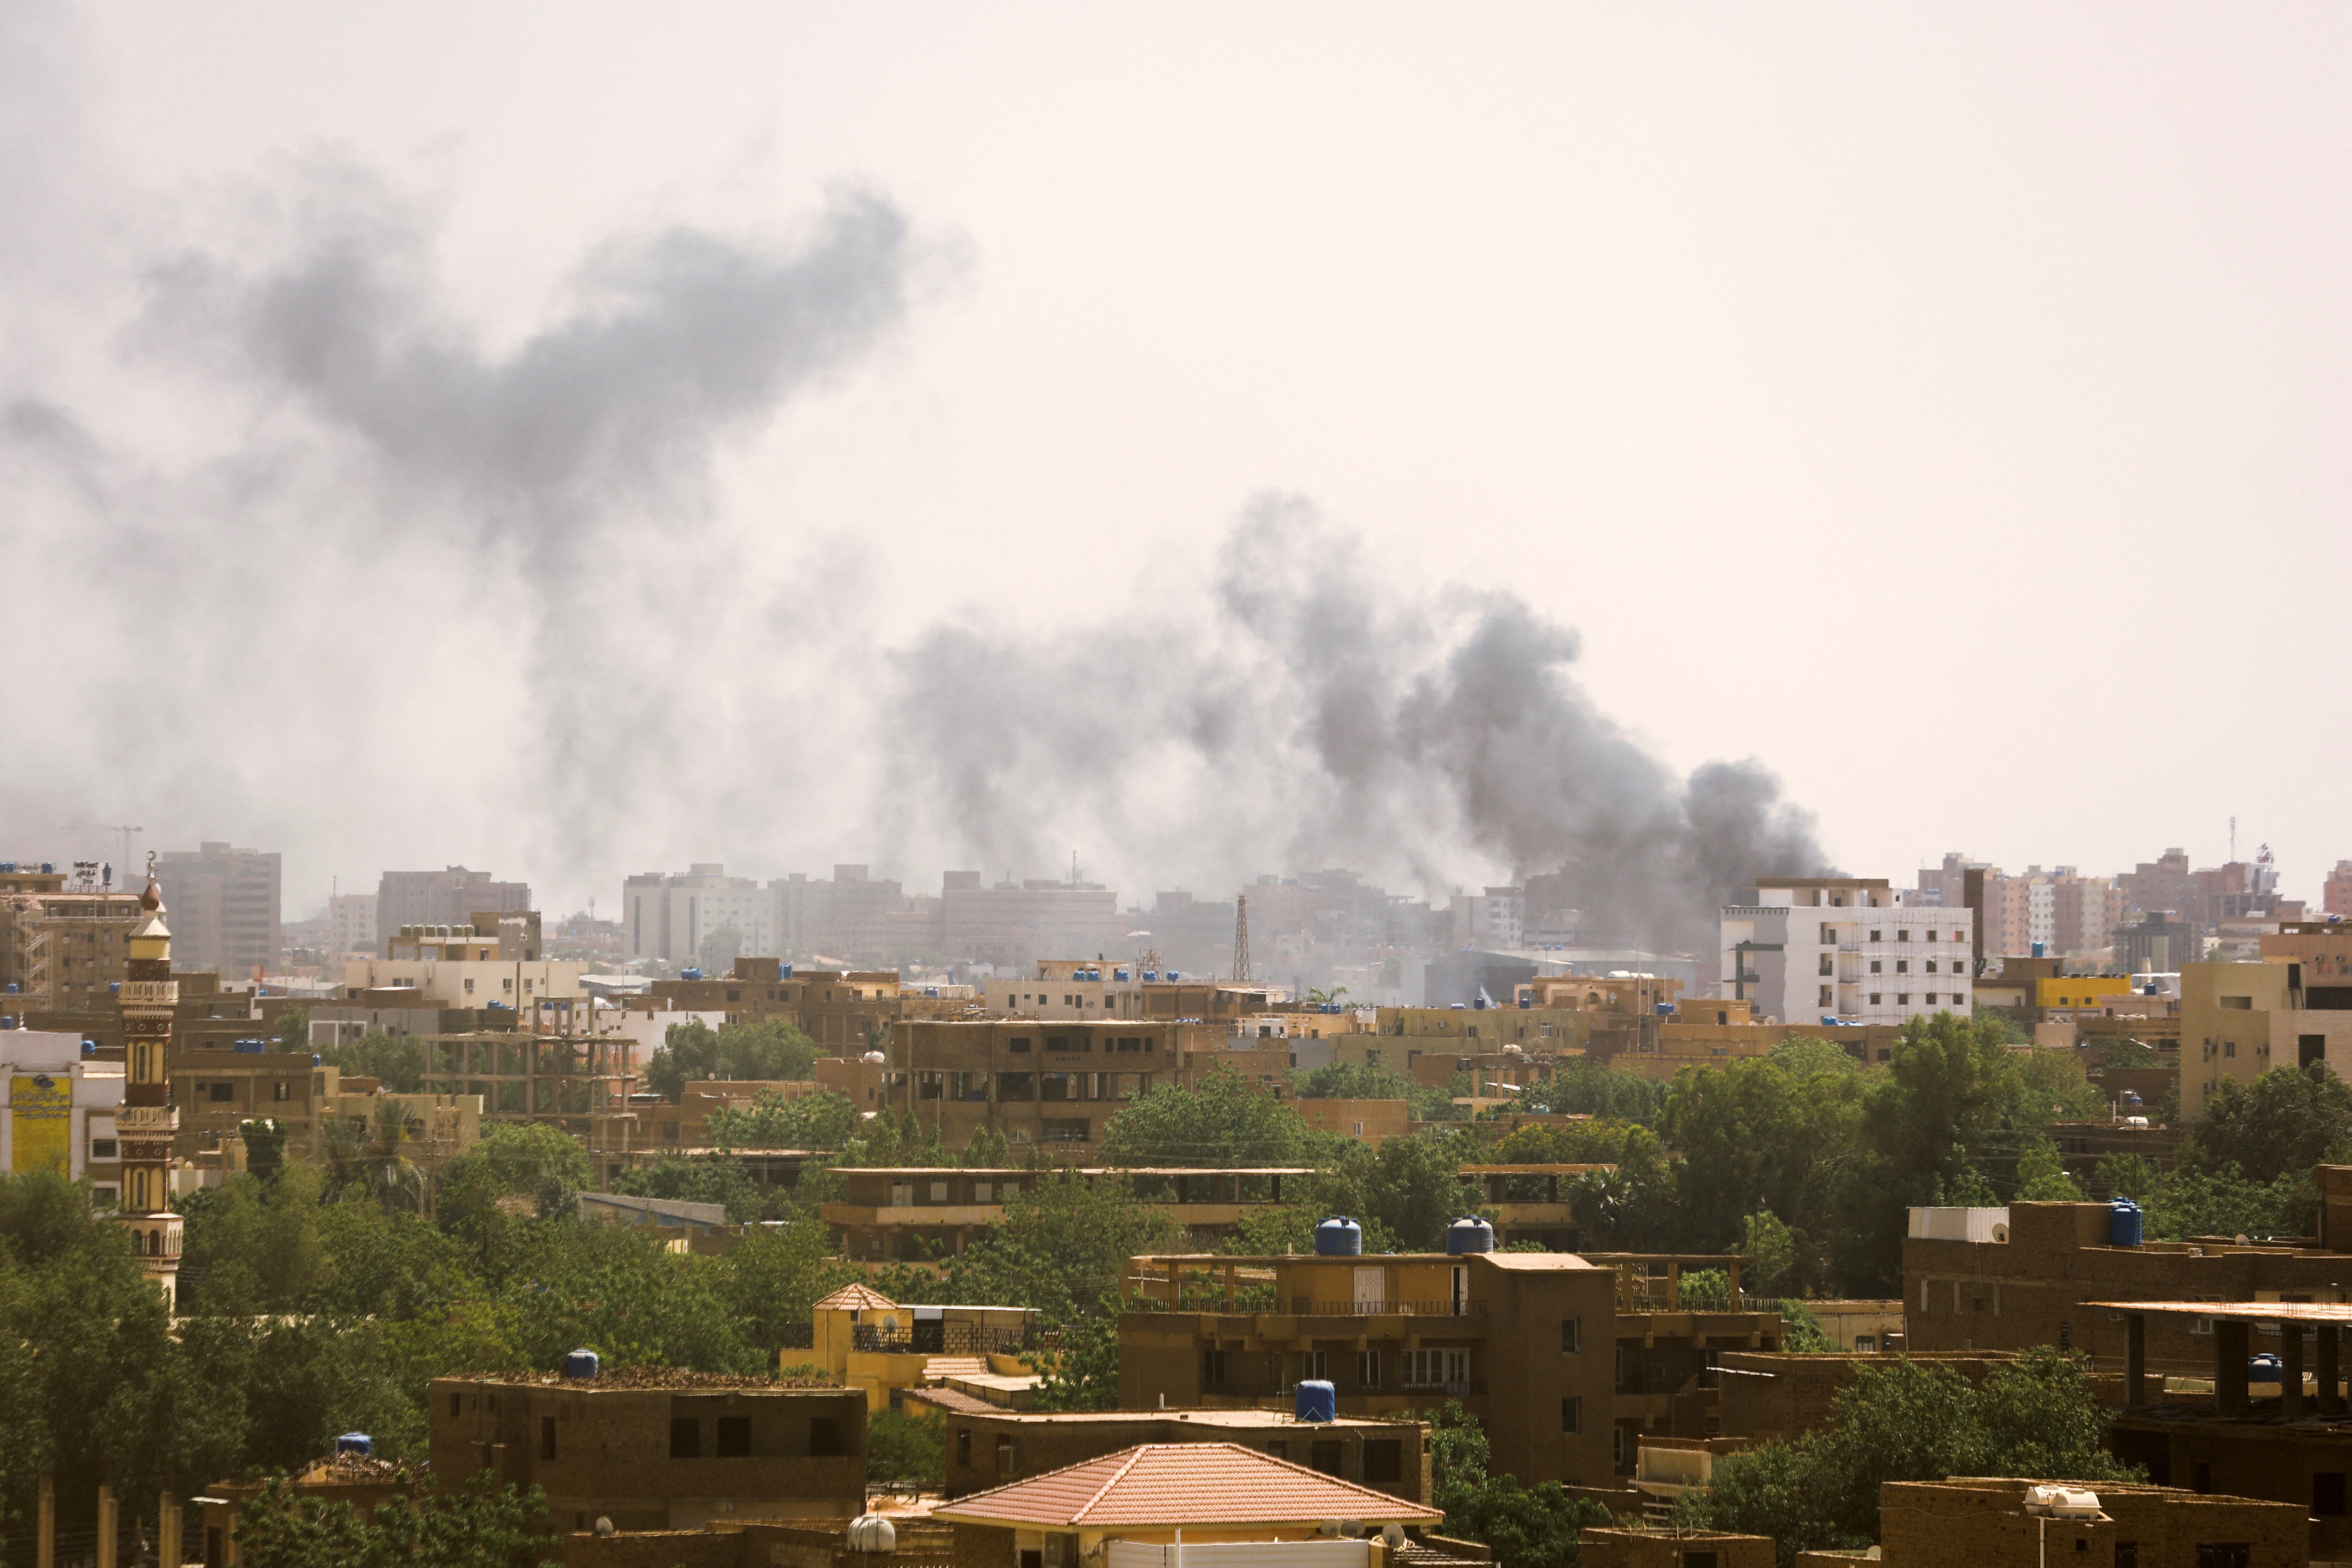 Smoke rises over buildings during clashes between the paramilitary Rapid Support Forces and the army in Khartoum, Sudan on 17 April